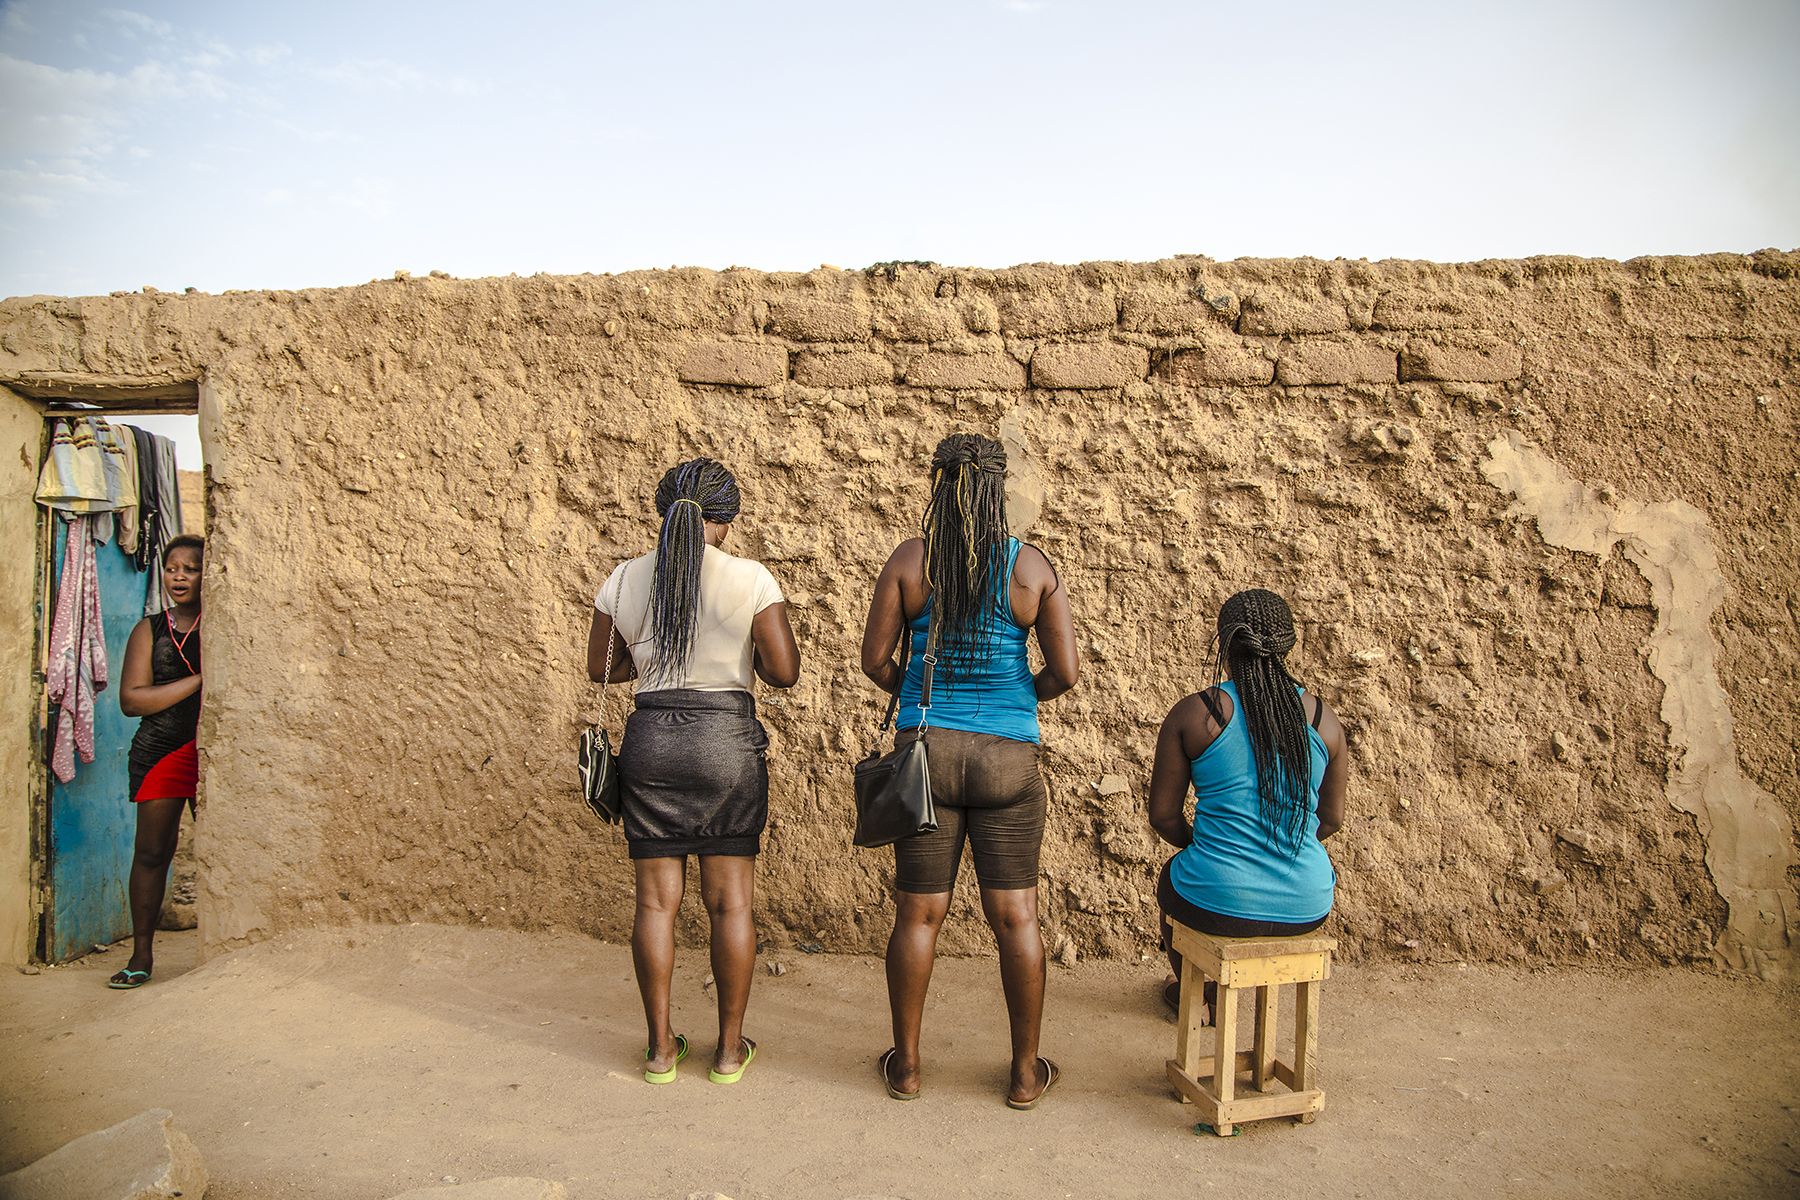 Many prostitutes in Agadez are recruited by friends and family. Image by Emily Kassie. Africa, 2016.